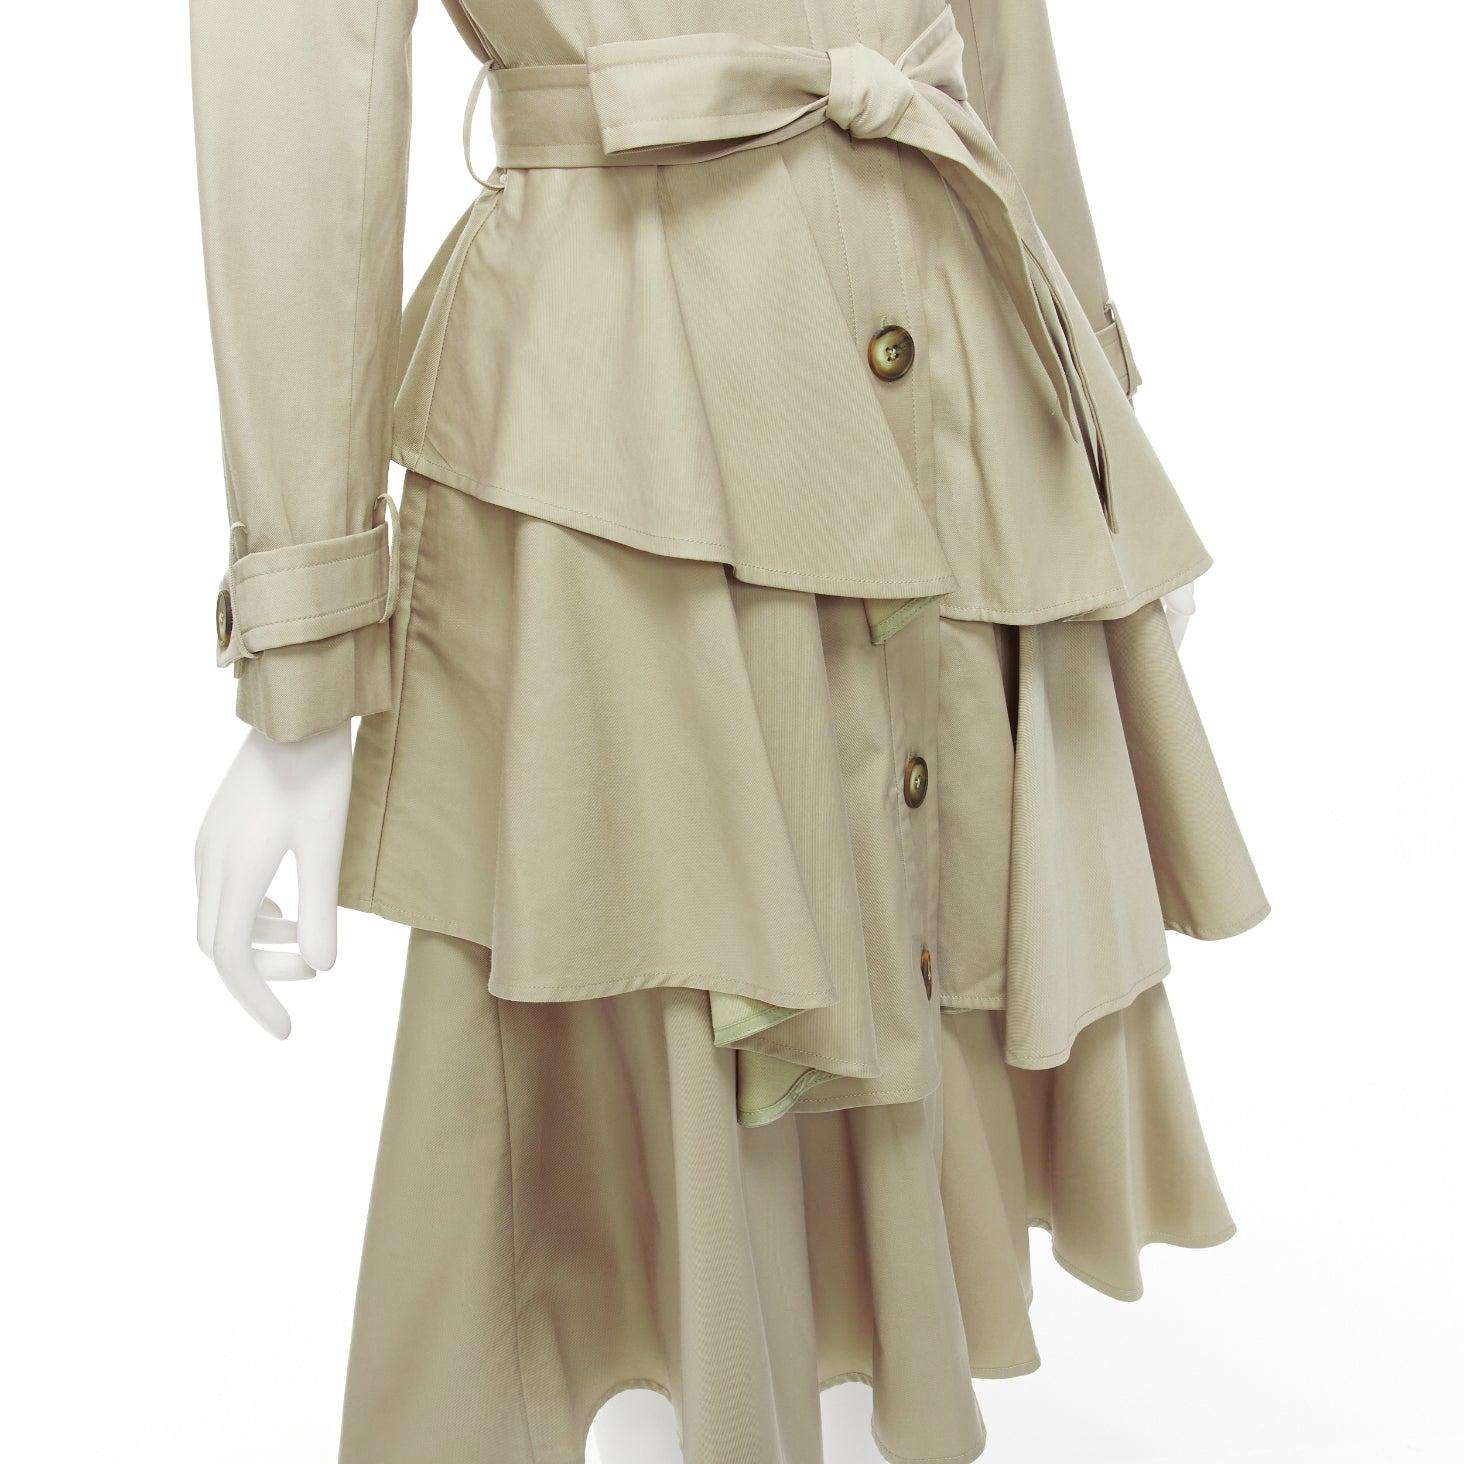 OSMAN LONDON khaki cotton tiered ruffle capelet belted long trench coat XS
Reference: AAWC/A00715
Brand: Osman
Material: Cotton, Blend
Color: Khaki
Pattern: Solid
Closure: Belt
Lining: Khaki Fabric
Made in: Portugal

CONDITION:
Condition: Very good,